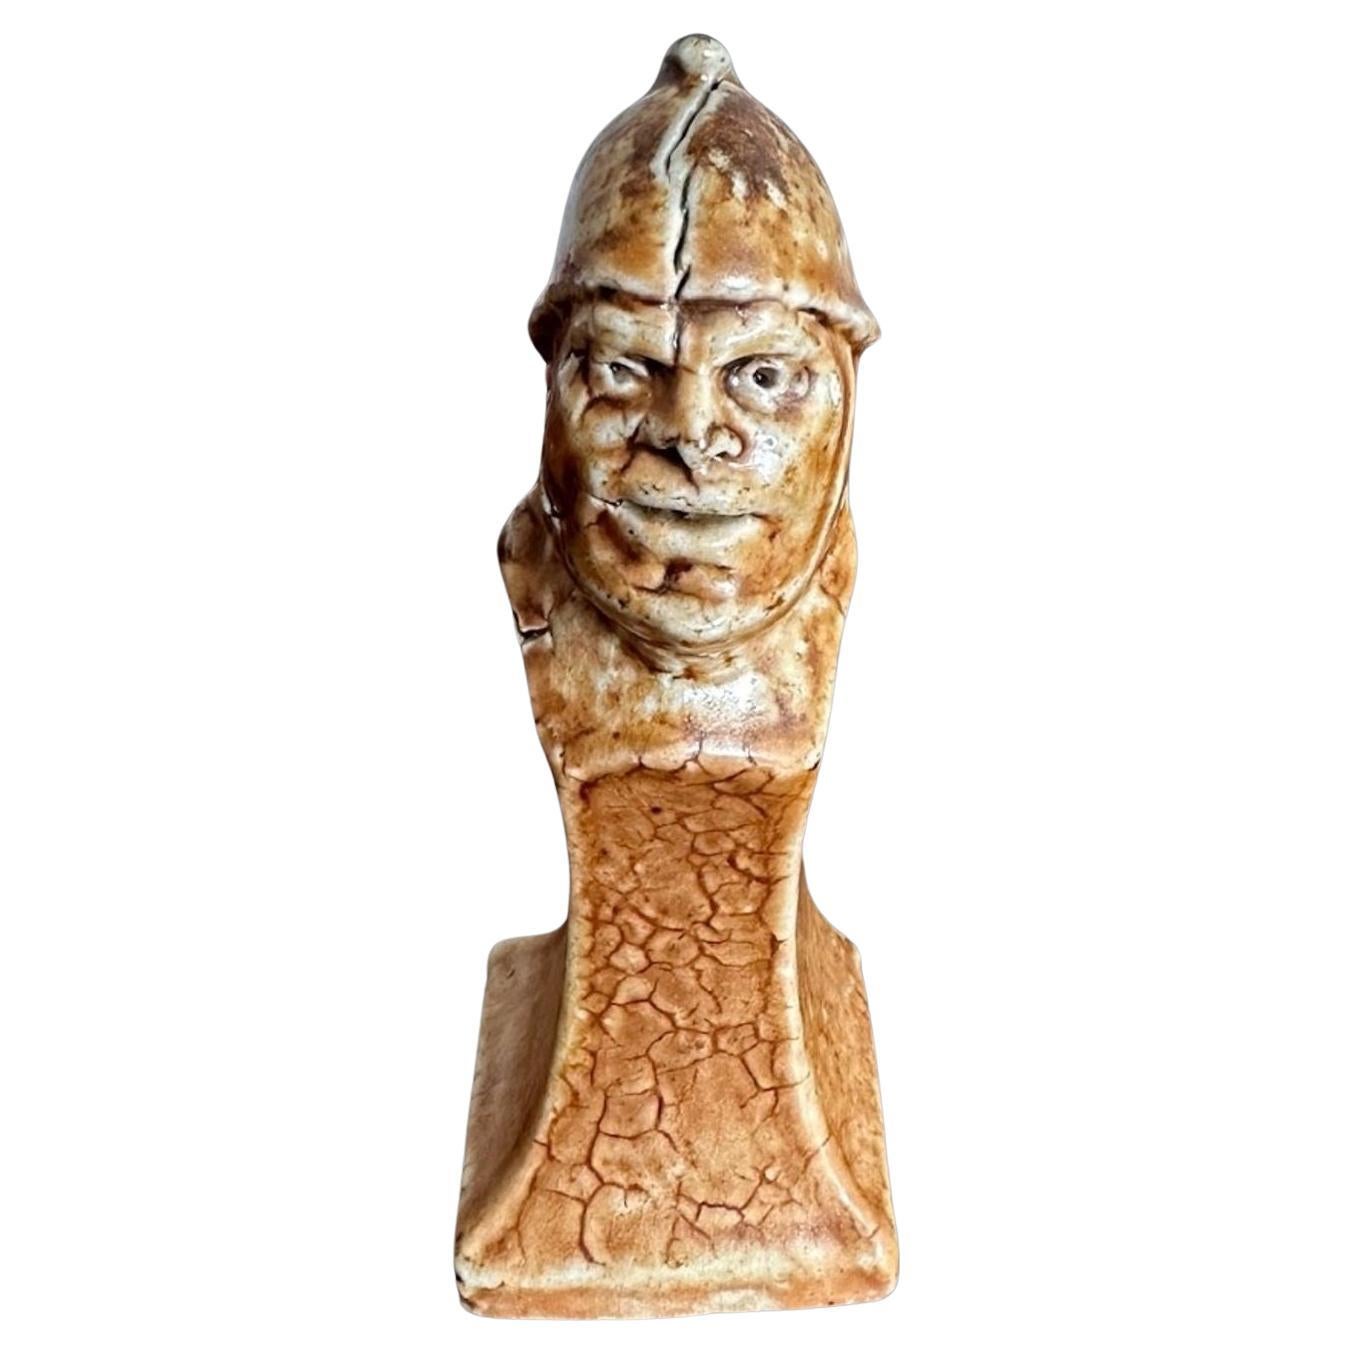 Martin Brother's Chess Piece